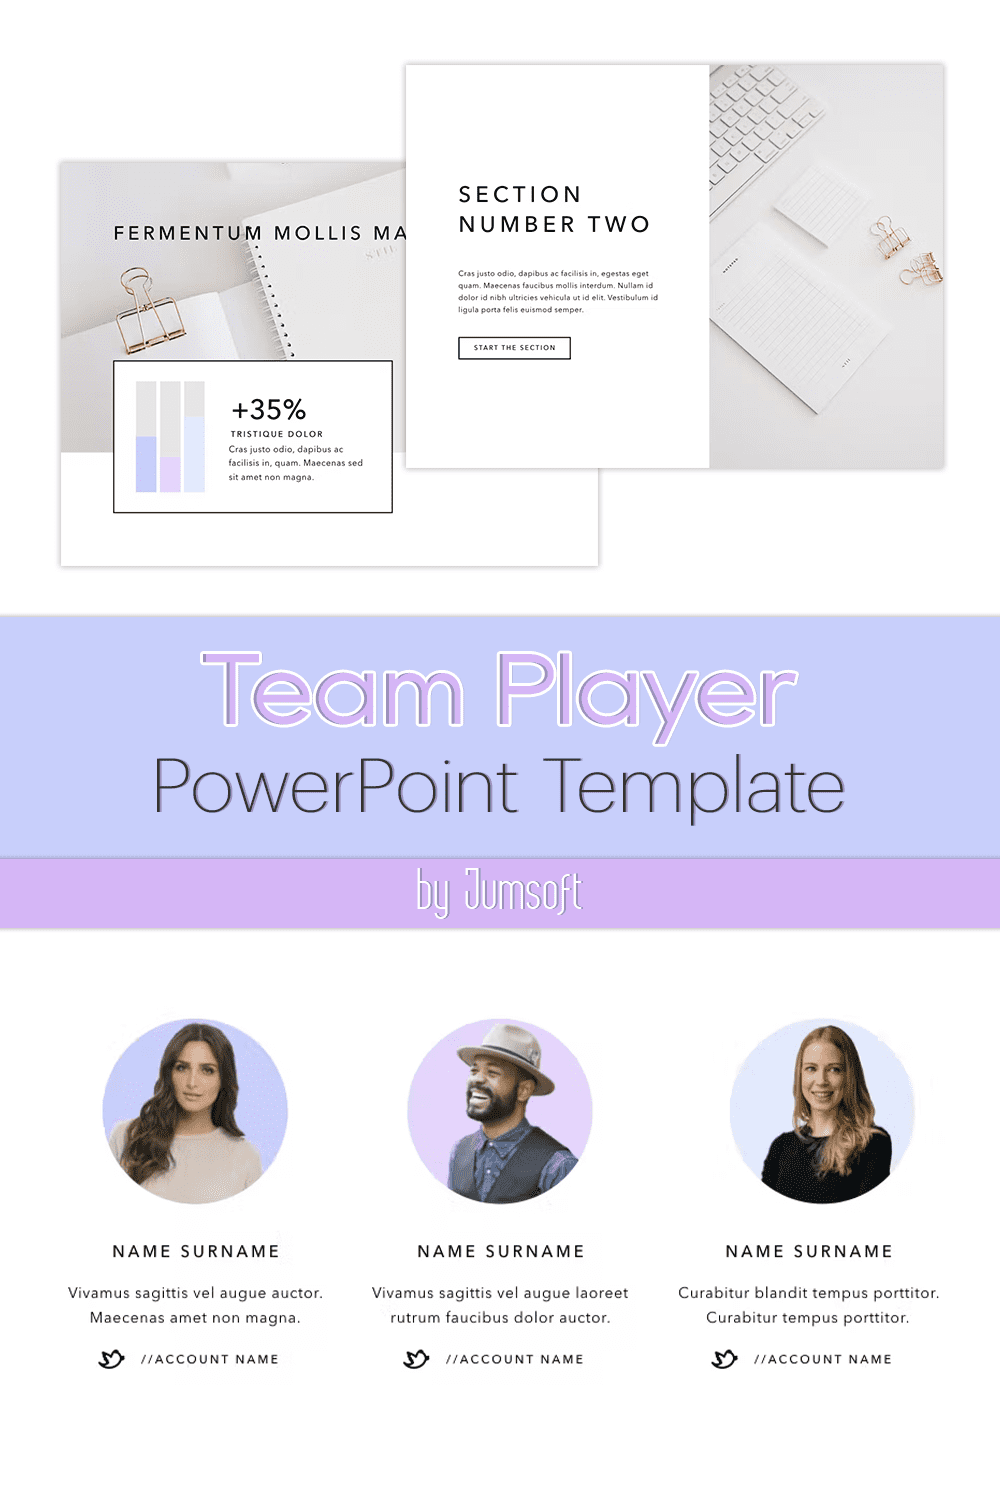 A selection of images of exquisite presentation template slides on the theme of the team player.